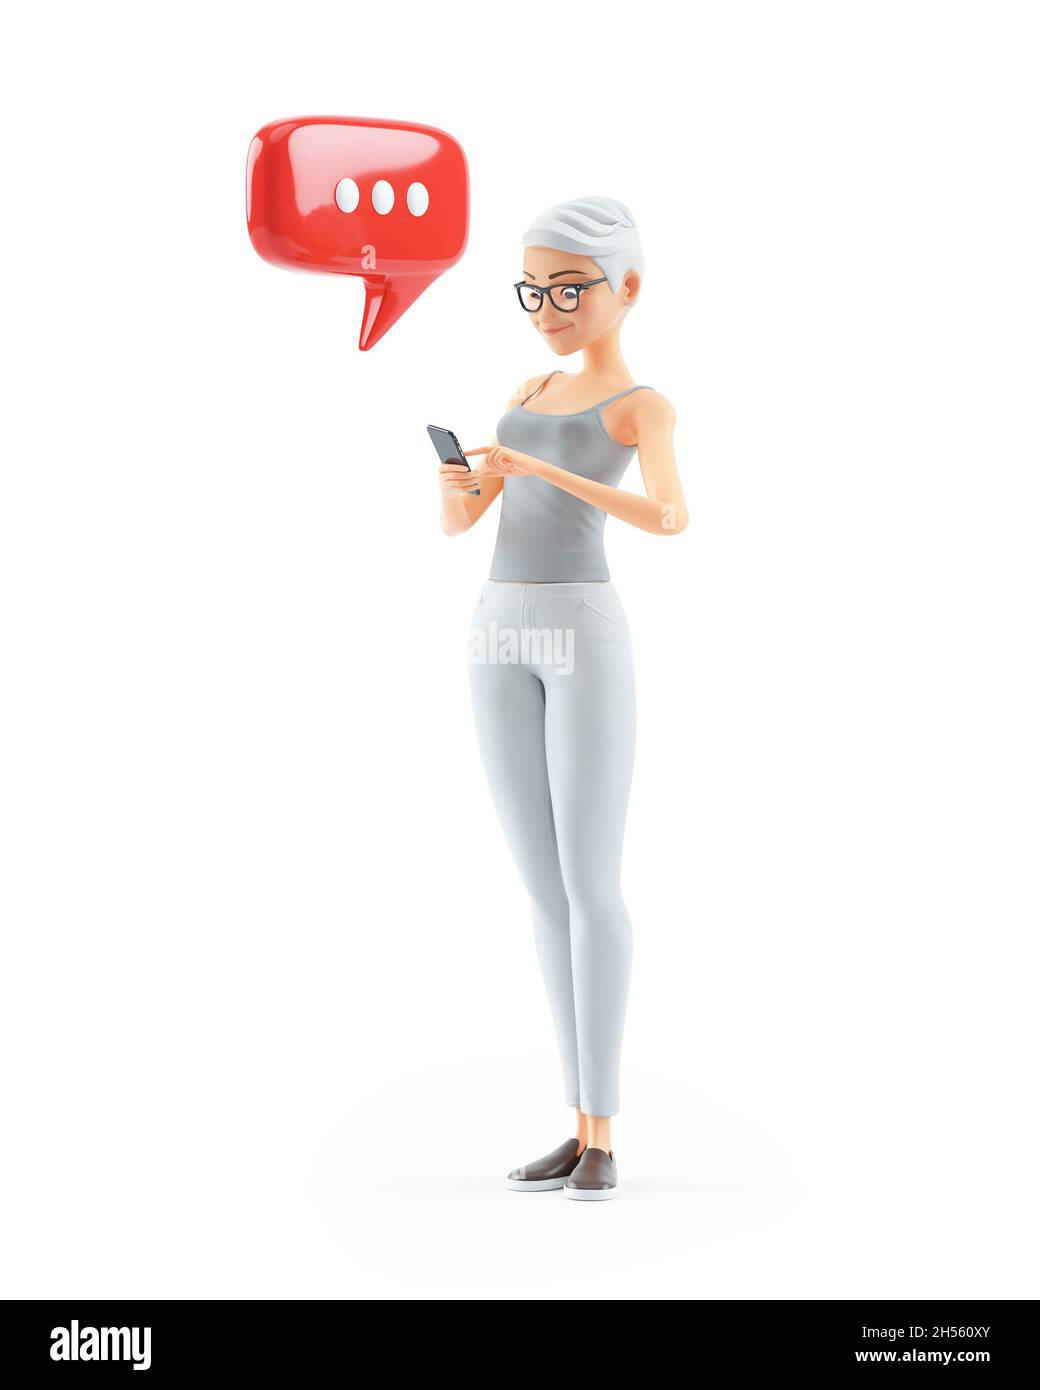 3d senior woman texting with smartphone, illustration isolated on white background Stock Photo